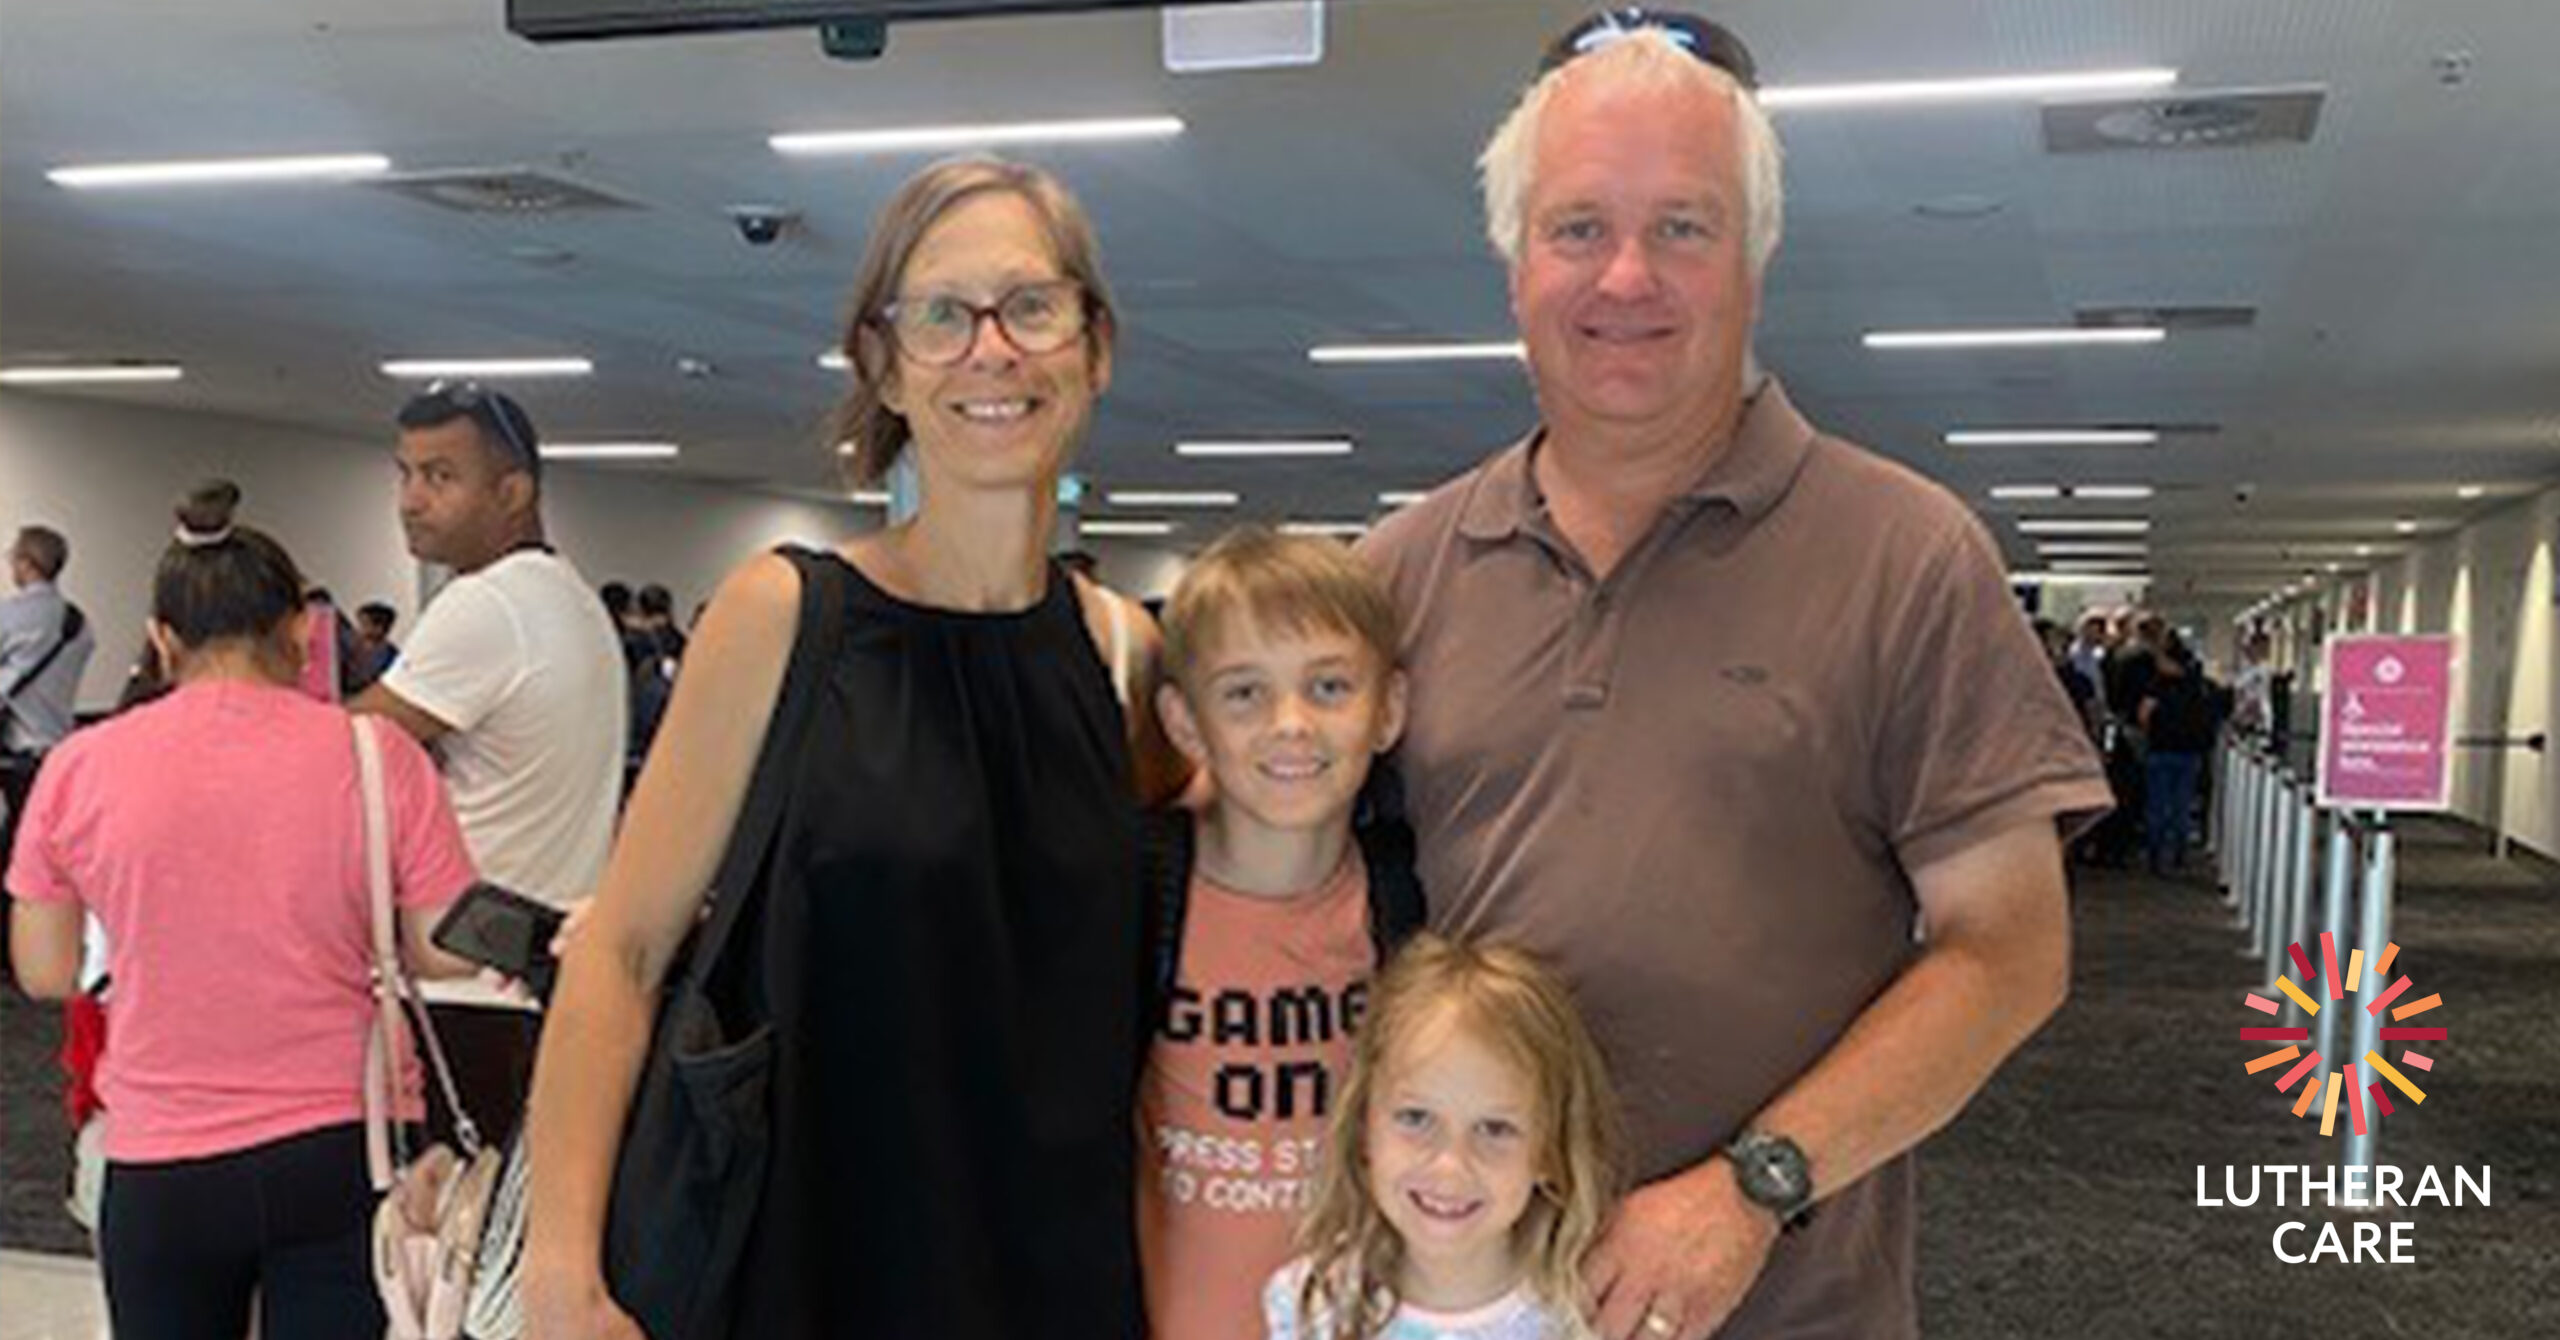 Susie and Graeme with their children at the airport. The Lutheran Care logo appears in the bottom right hand corner.